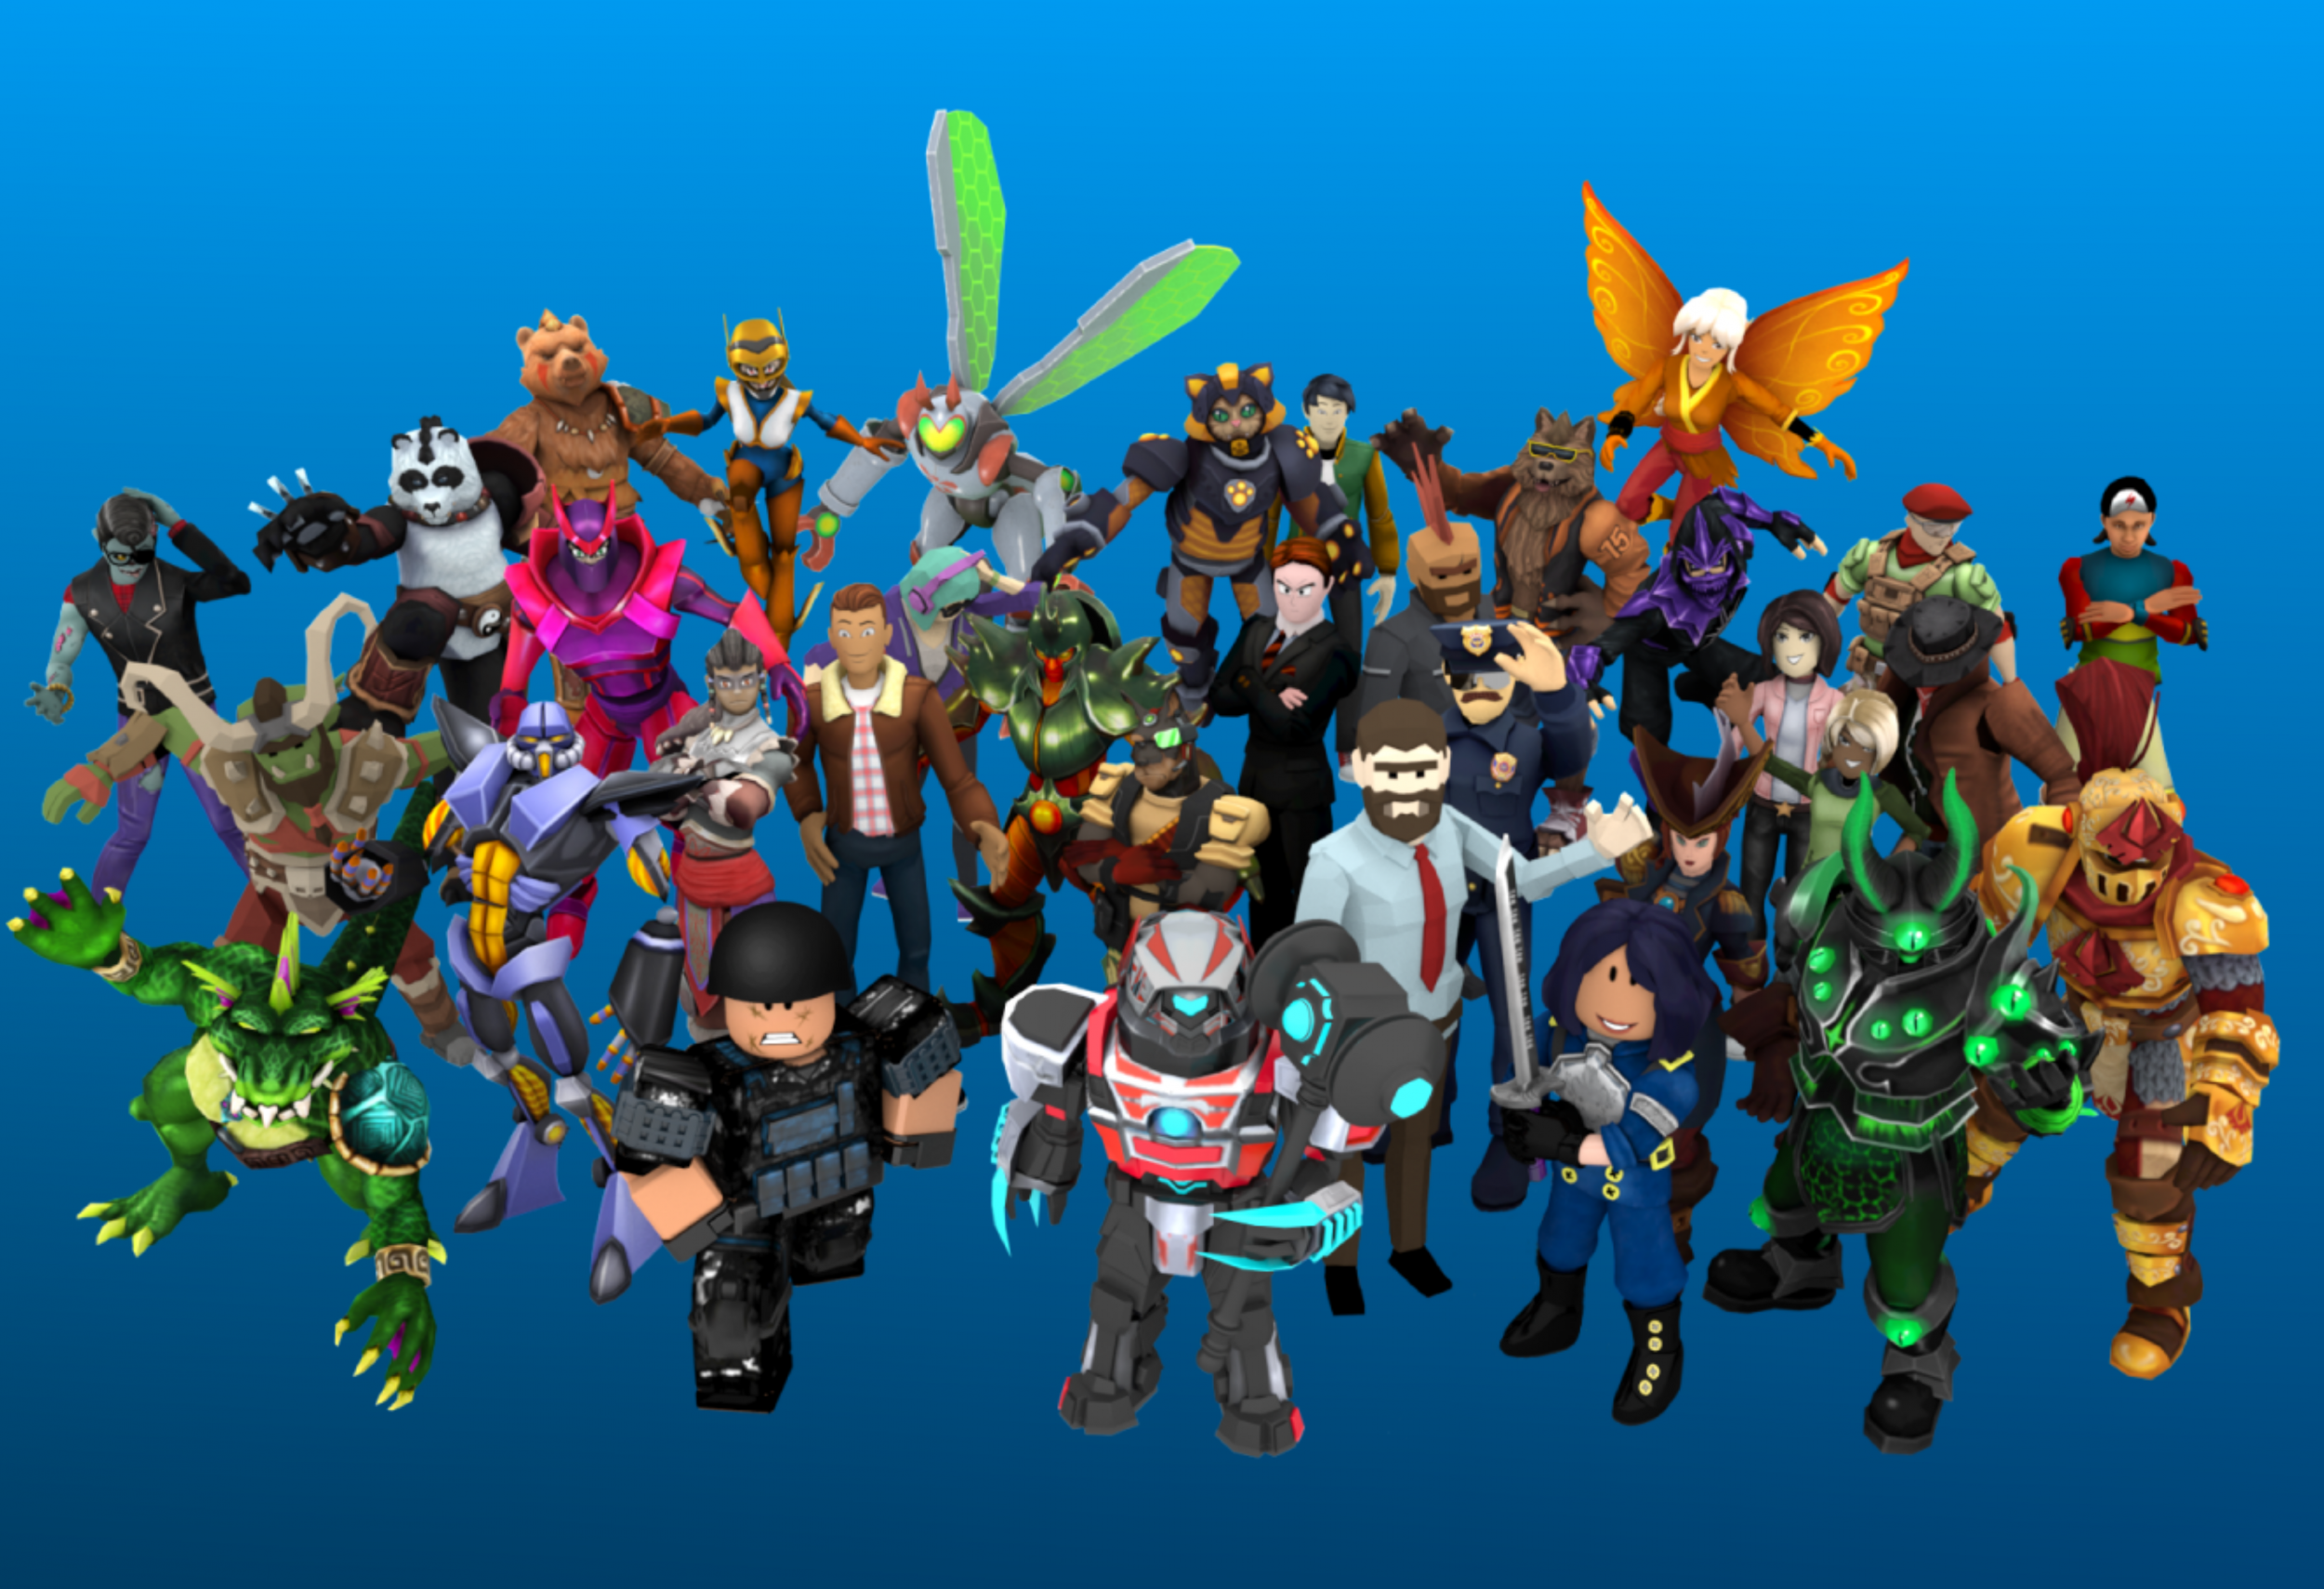 Top 50 Best Roblox Avatars That Look Freakin Awesome Ranked Fun To Most  Fun  GAMERS DECIDE